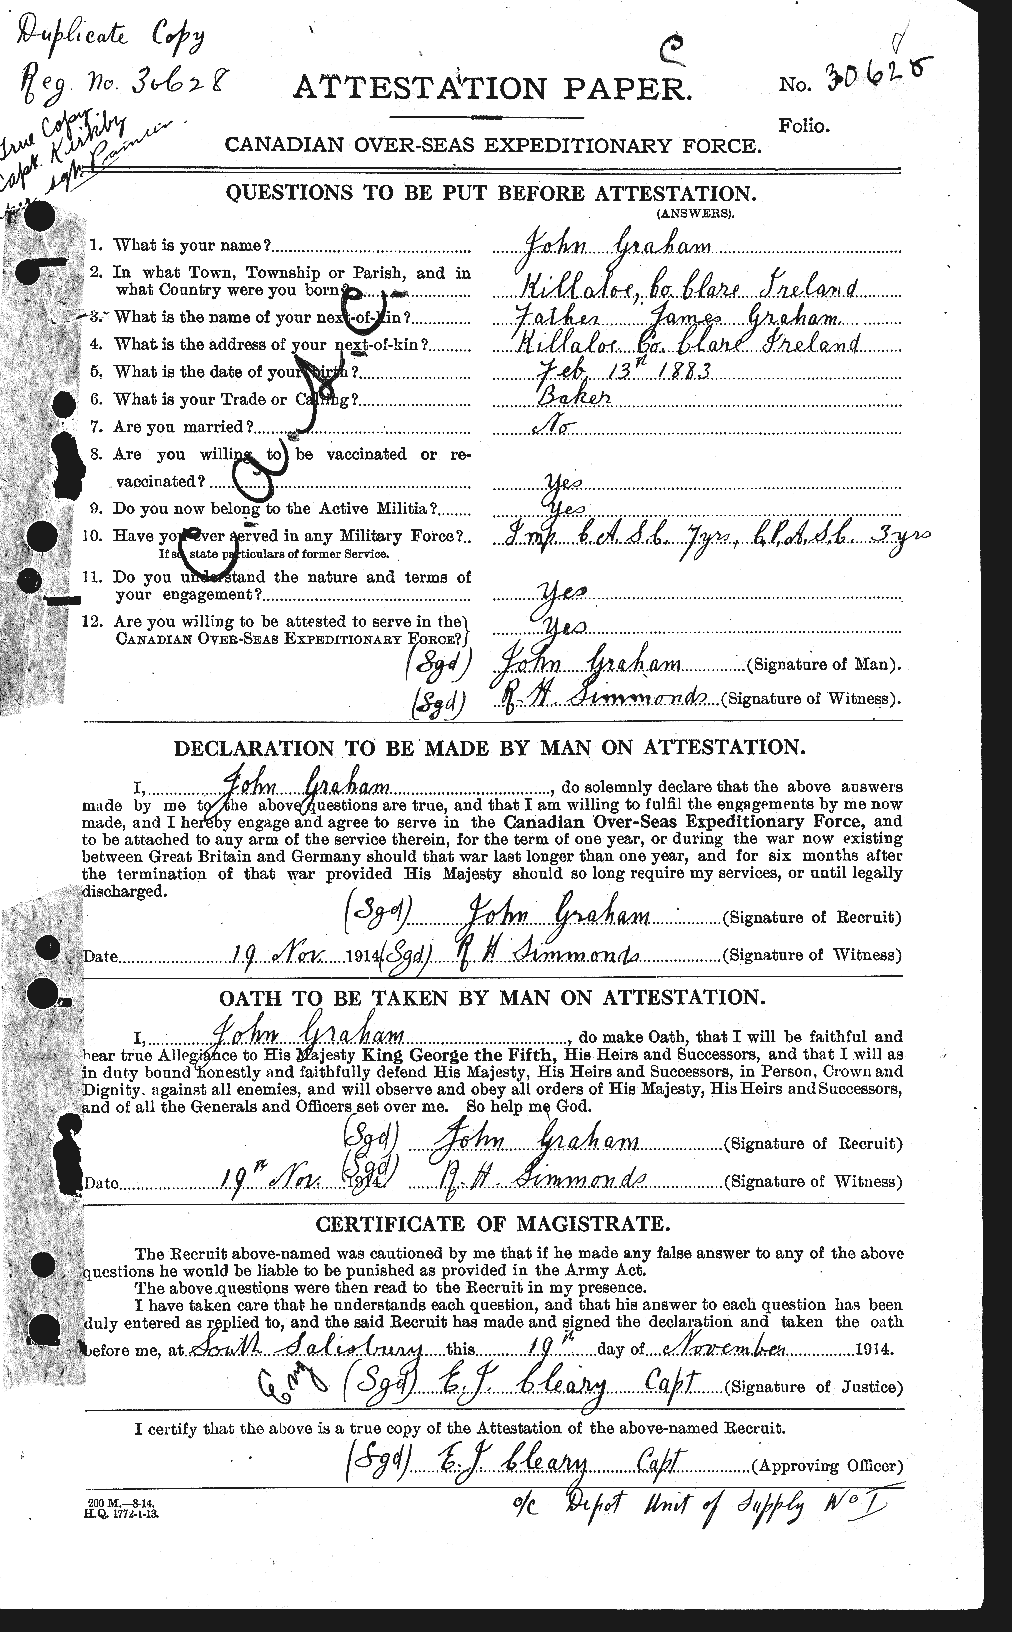 Personnel Records of the First World War - CEF 359255a